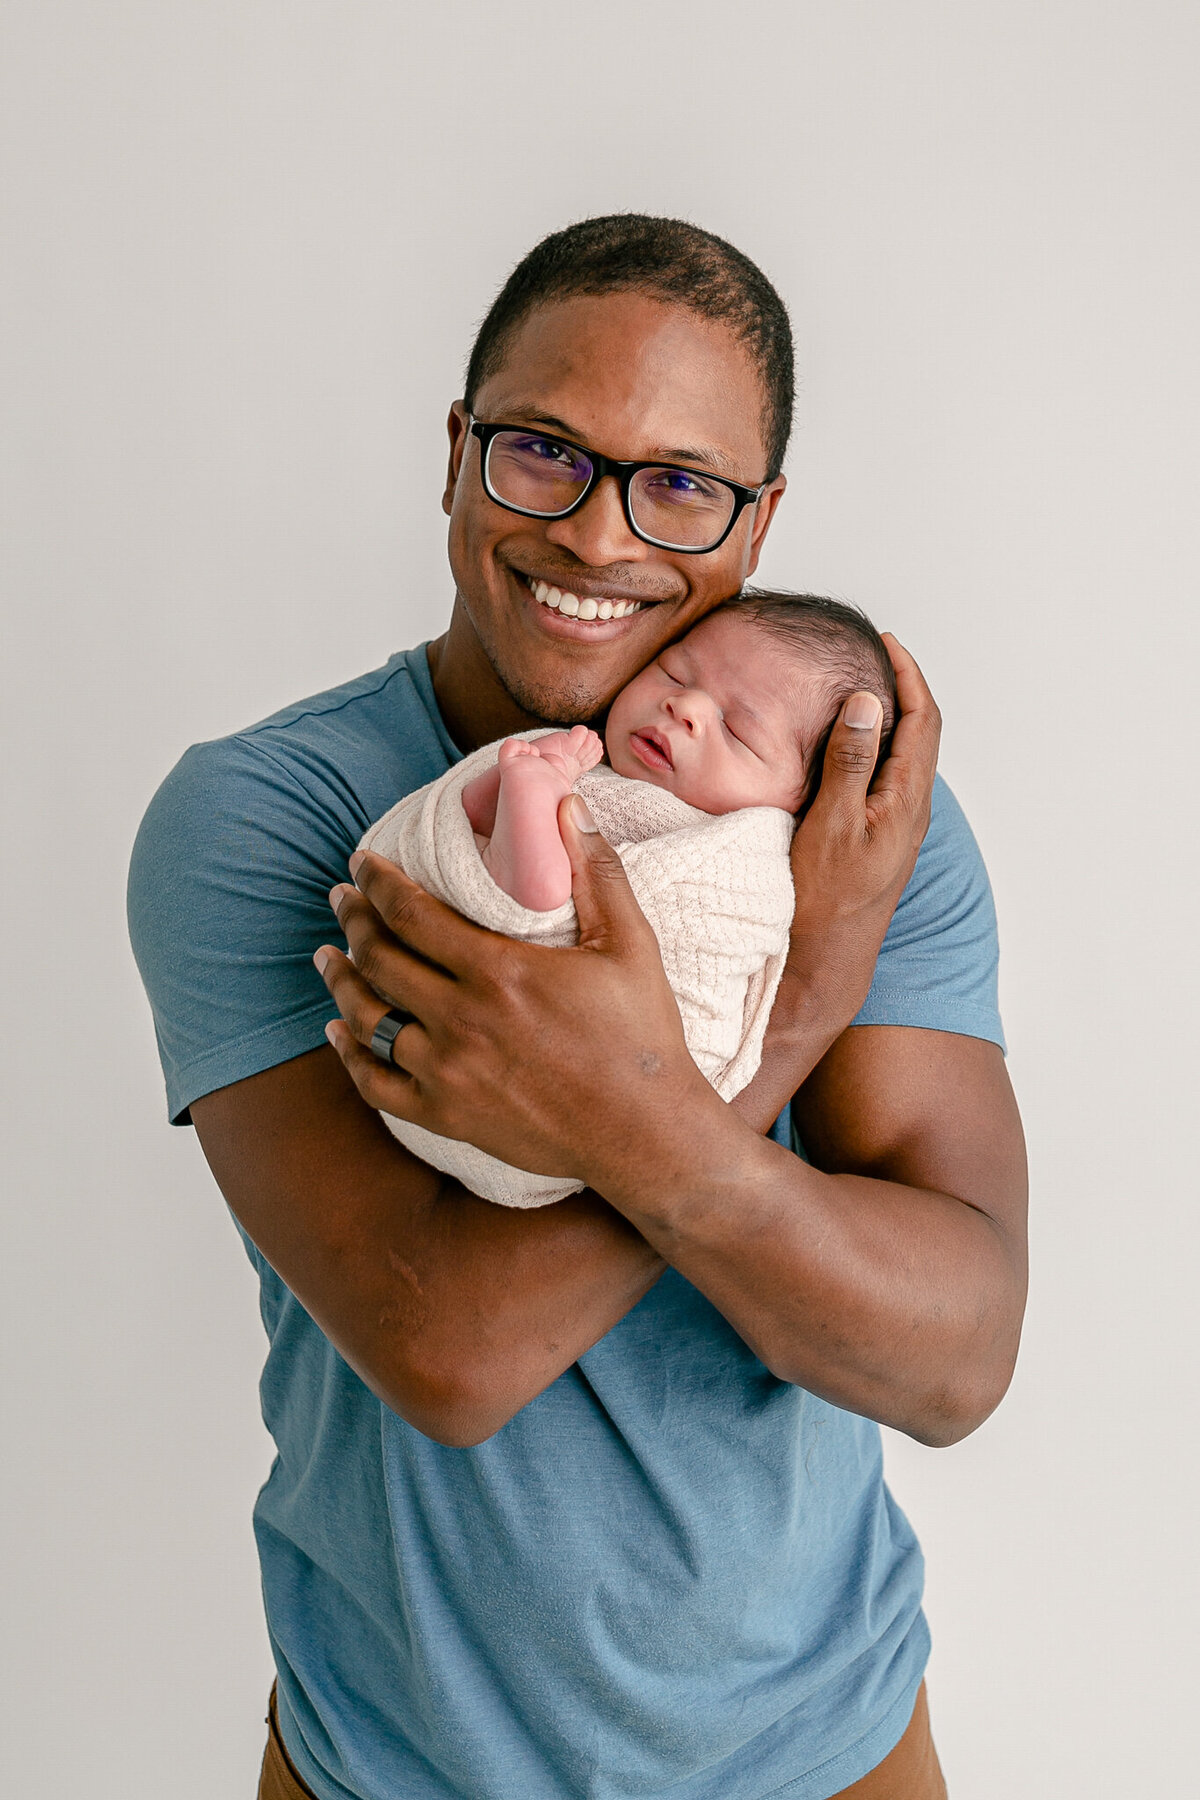 Dad in blue shirt with dark hair and glasses smiling at camera while holding newborn baby swaddled in beige. Dad is holding baby cheek to cheek at Portland Oregon newborn photography session